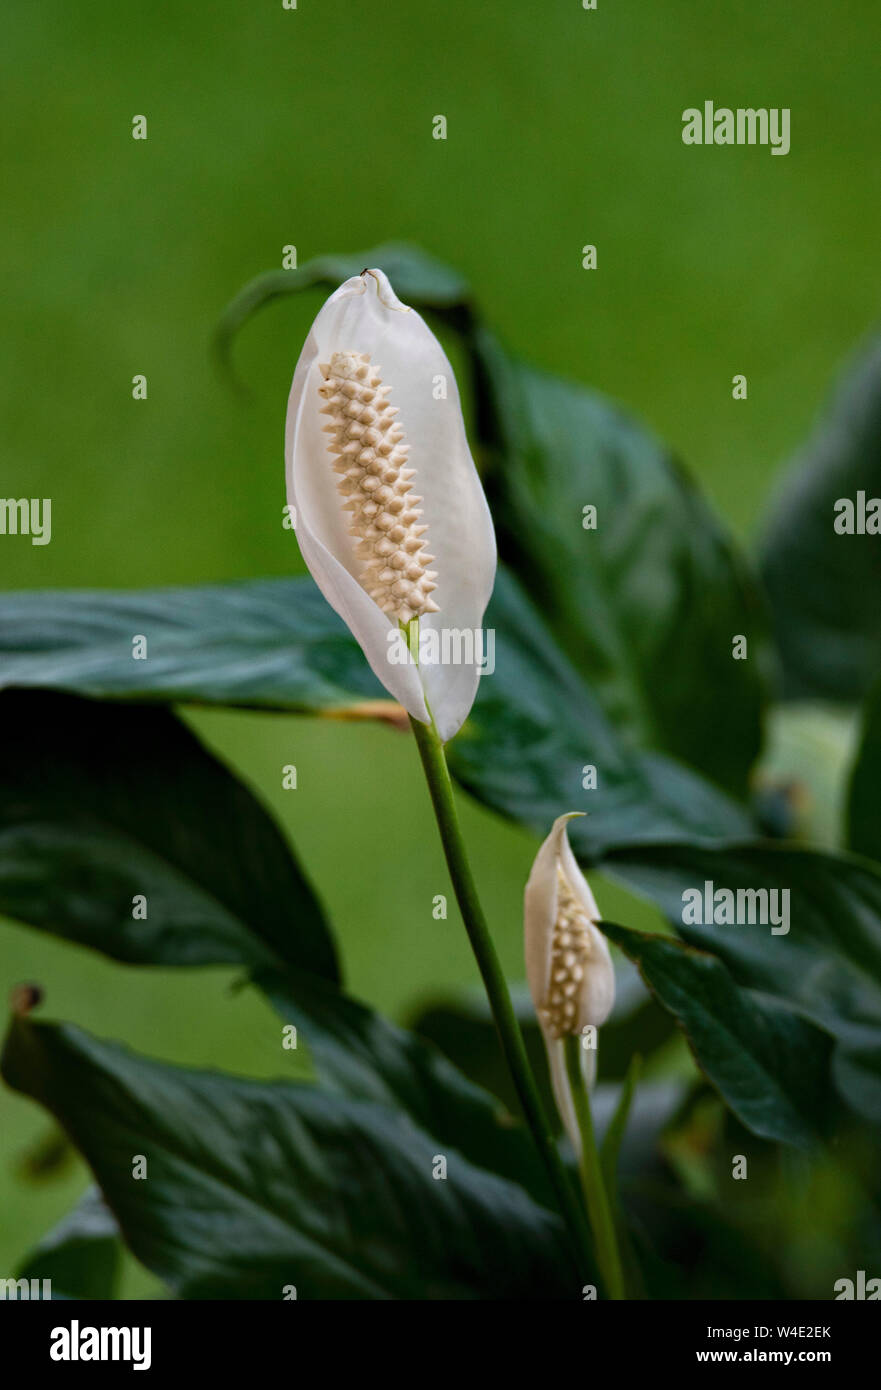 A single Peace Lily against a leafy background Stock Photo